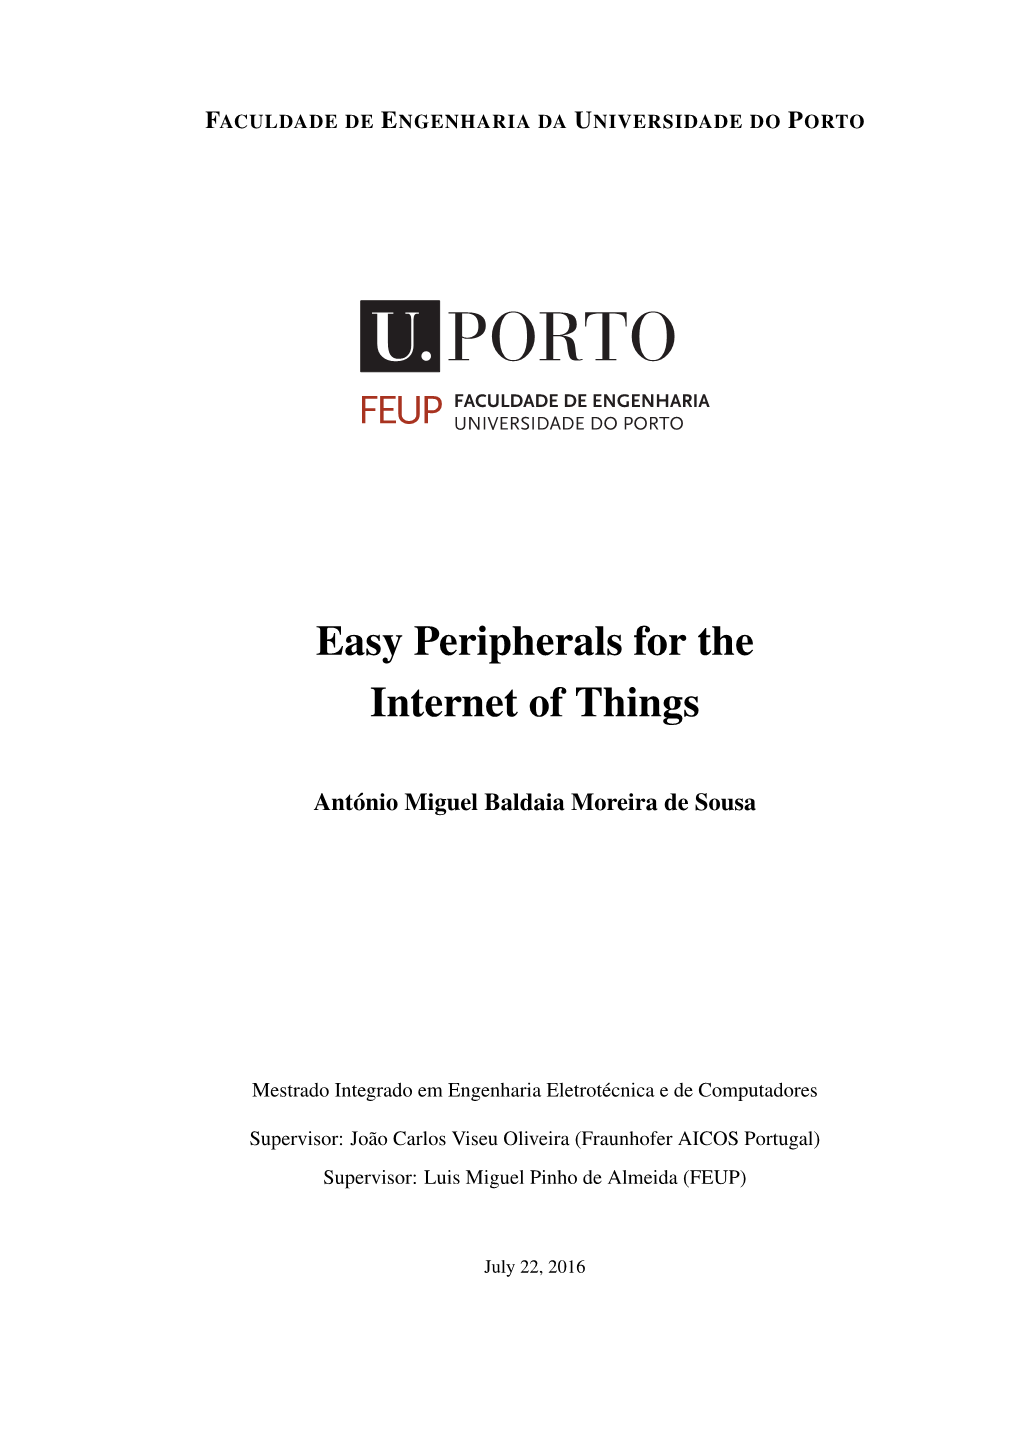 Easy Peripherals for the Internet of Things